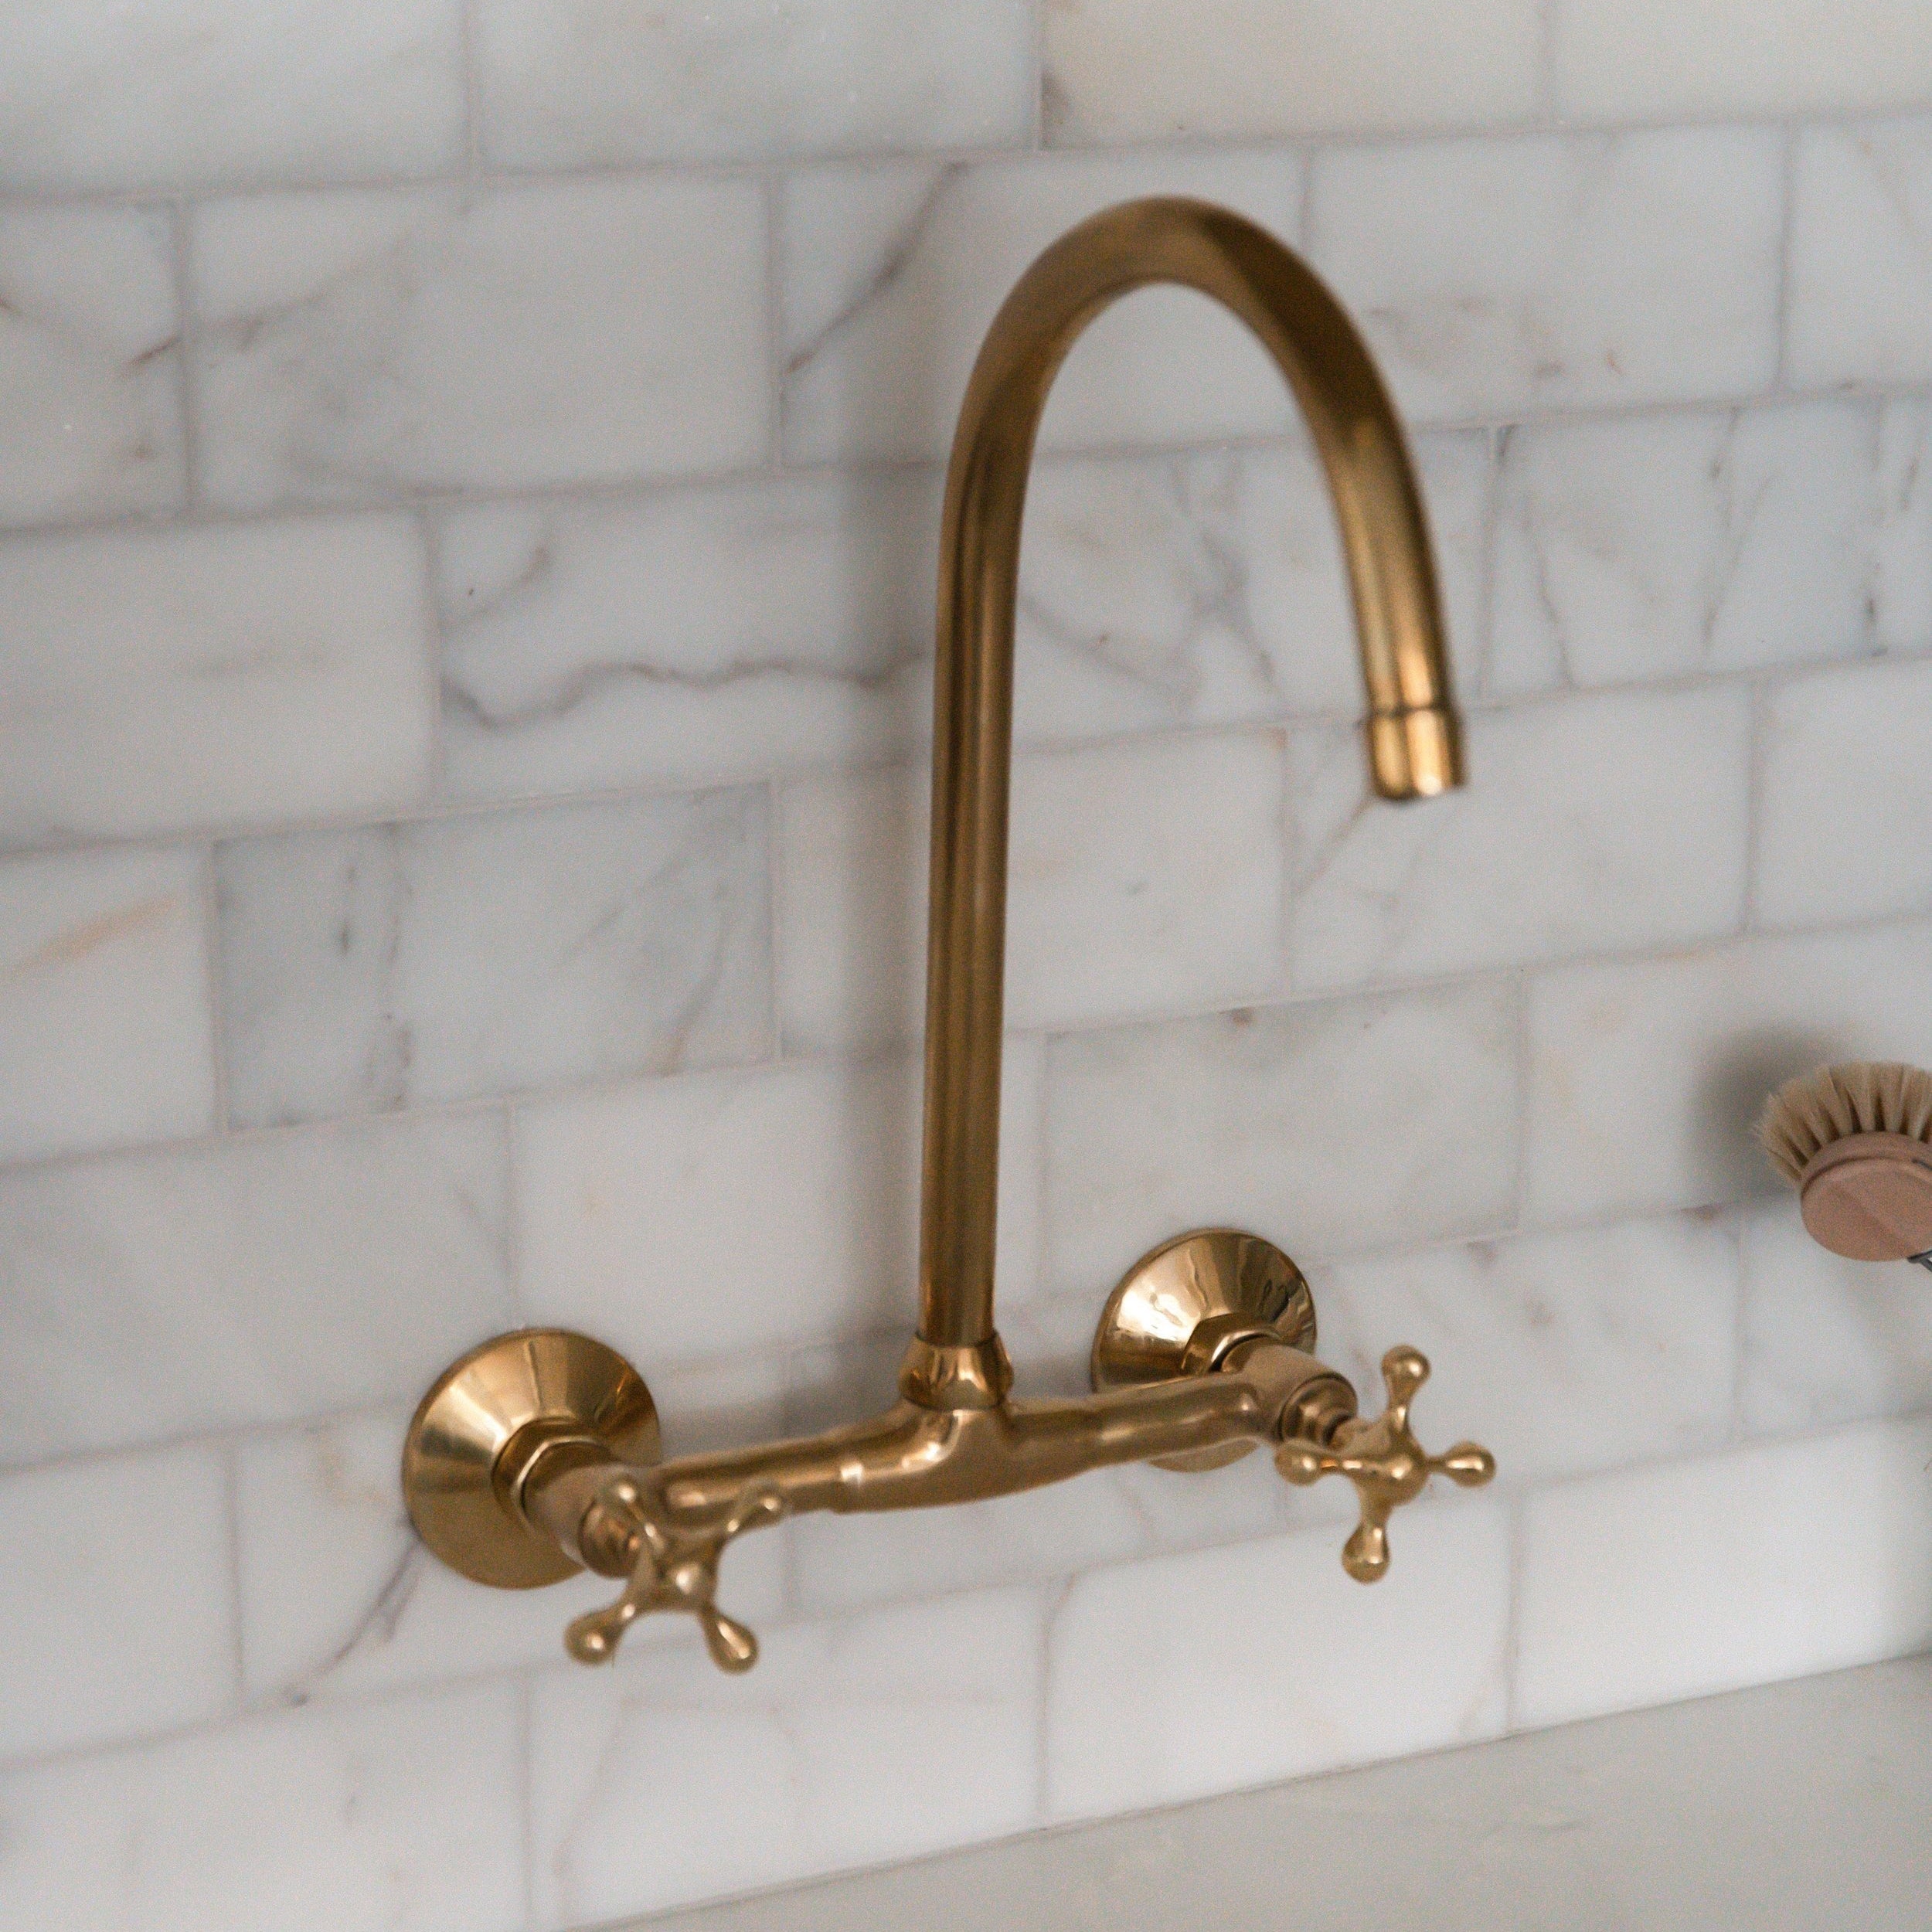 Wall mount Kitchen Faucet